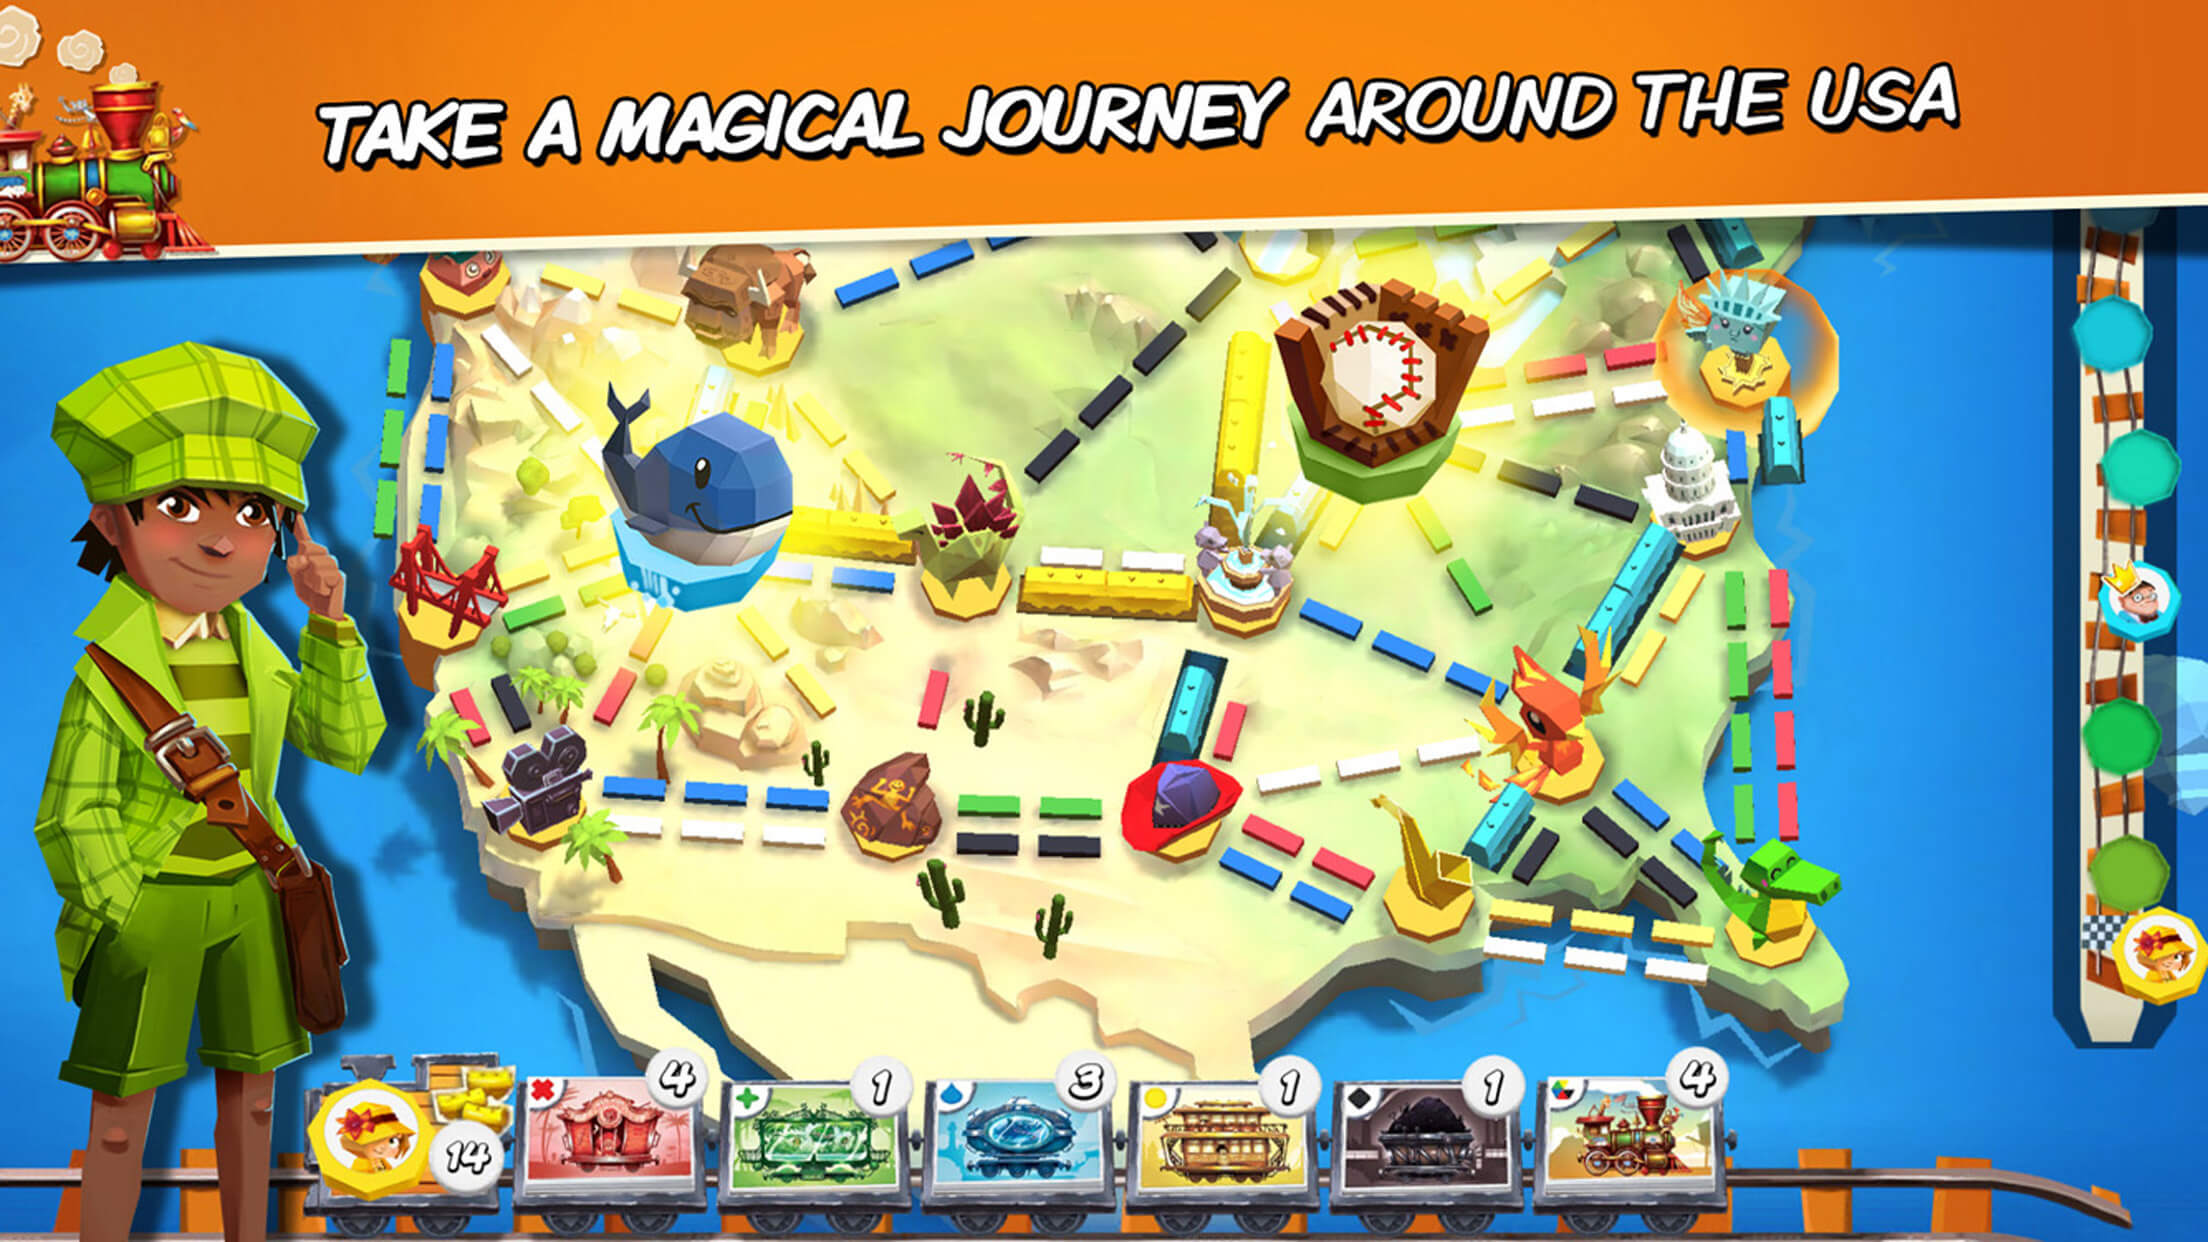 Ticket to Ride: First Journey iOS